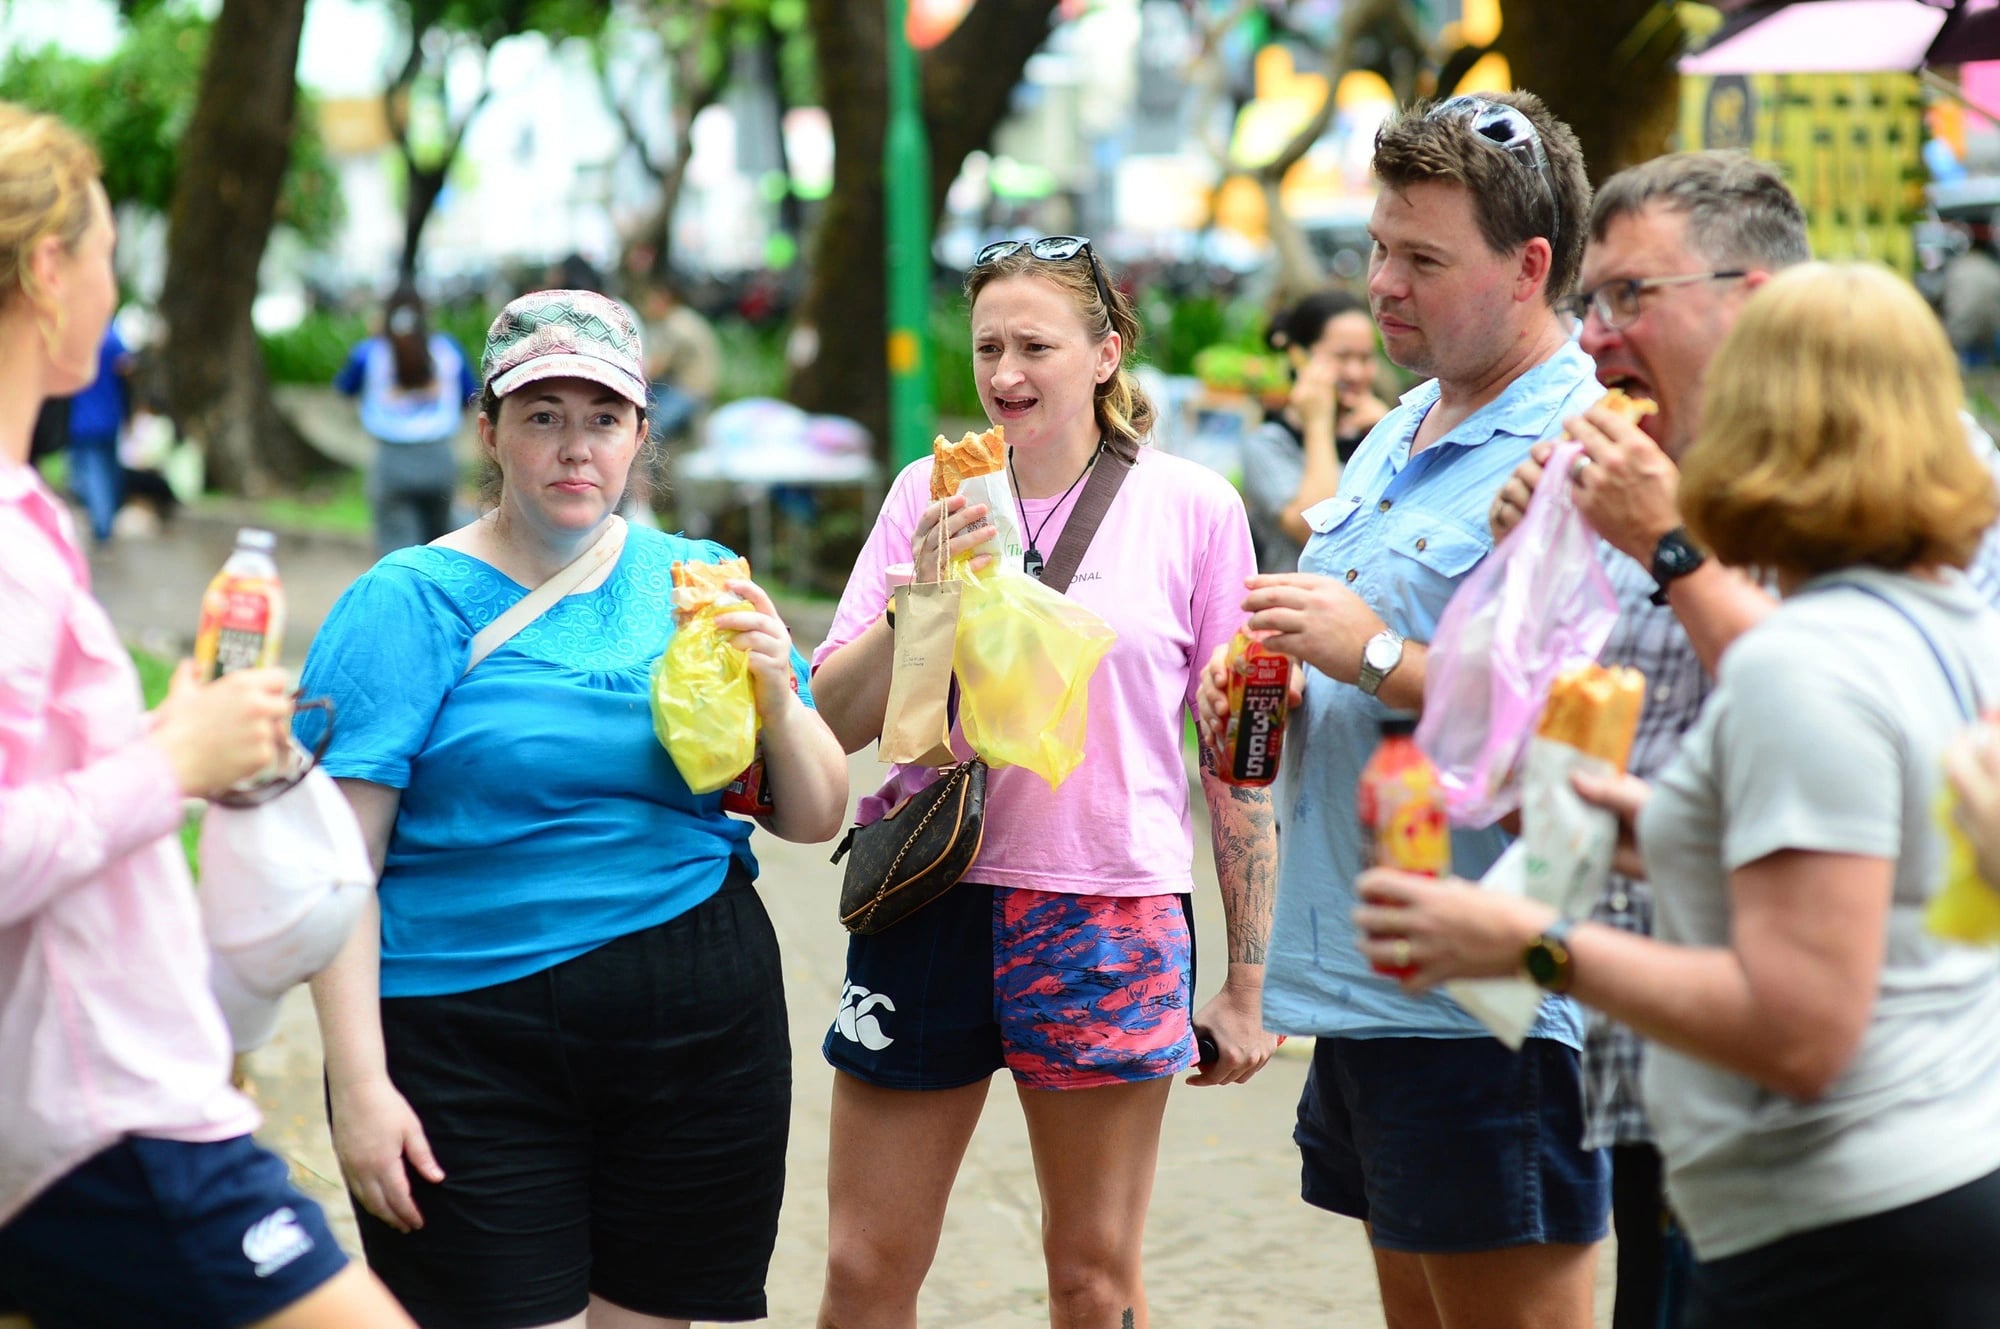 Locals, tourists enjoy 'banh mi' festival in Ho Chi Minh City